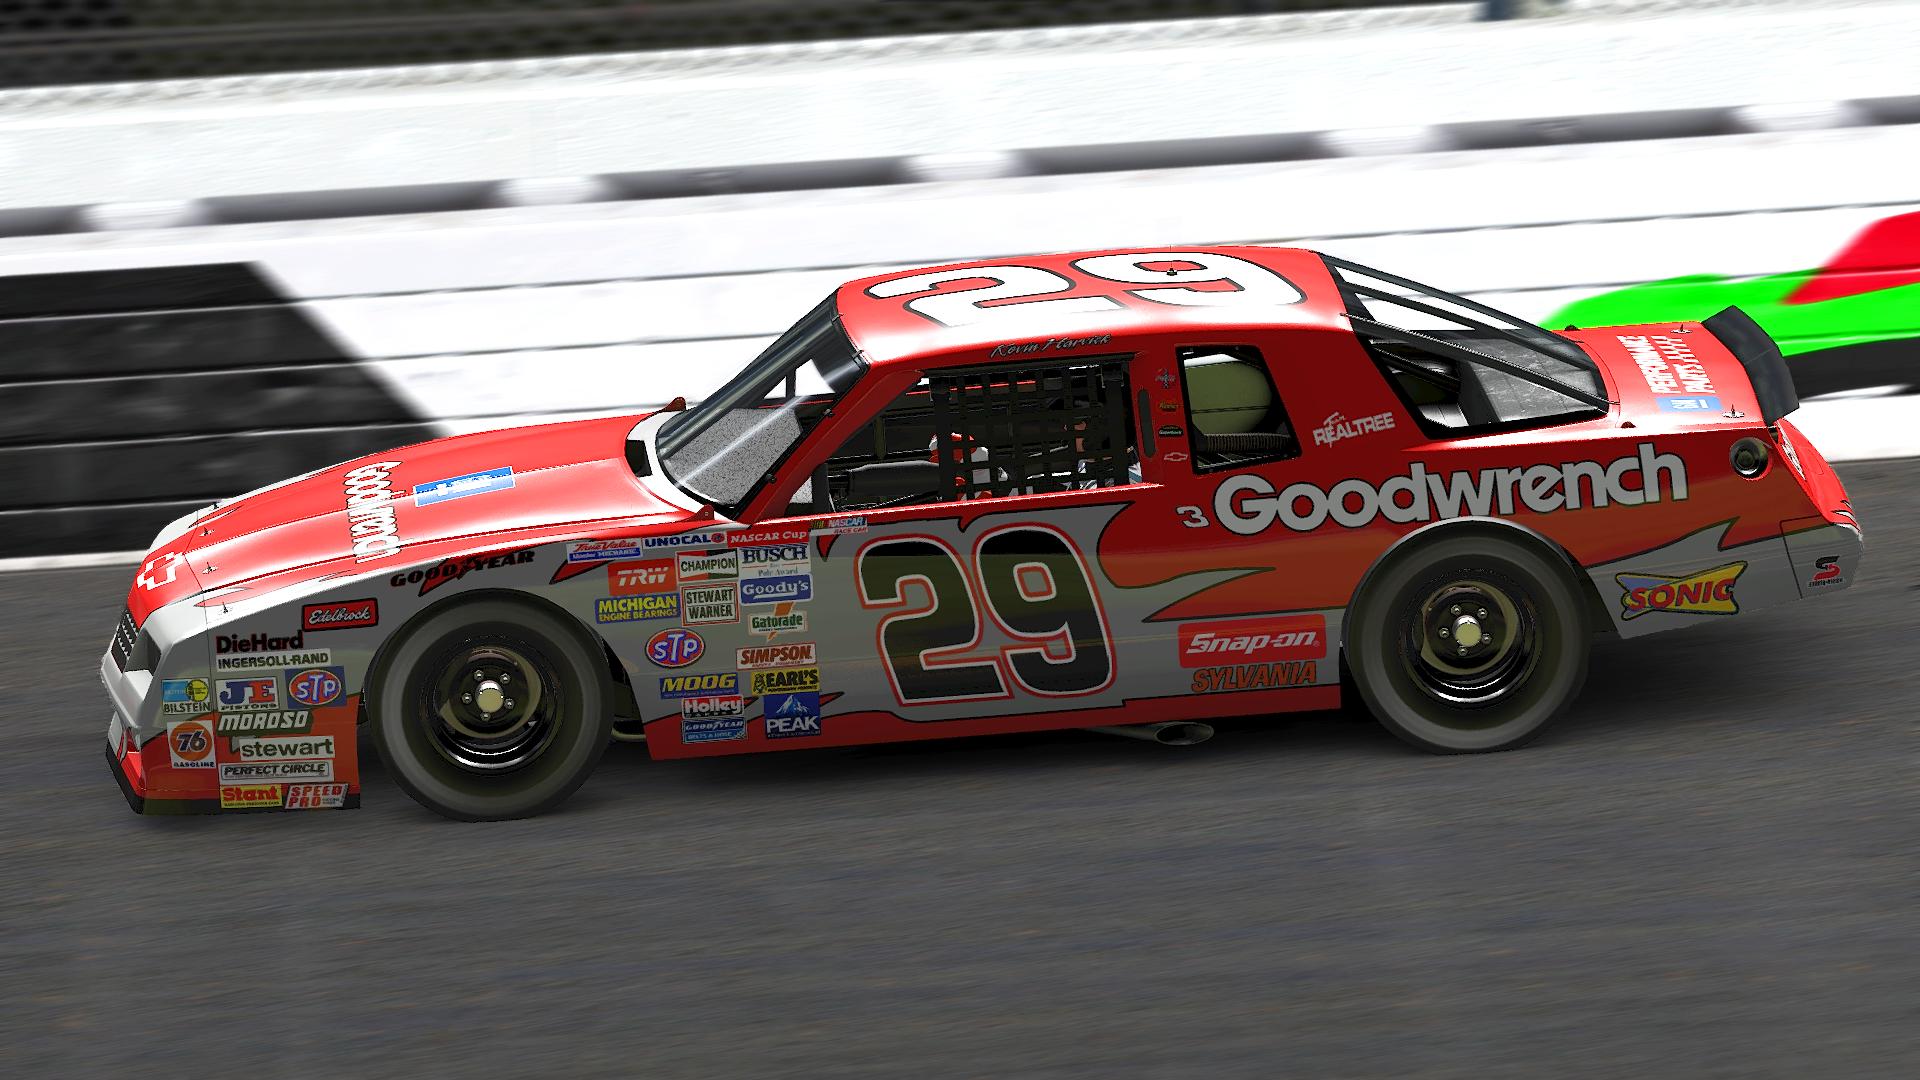 Preview of Kevin Harvick 1987 Goodwrench (Budweiser Shootout) by Ryan B.